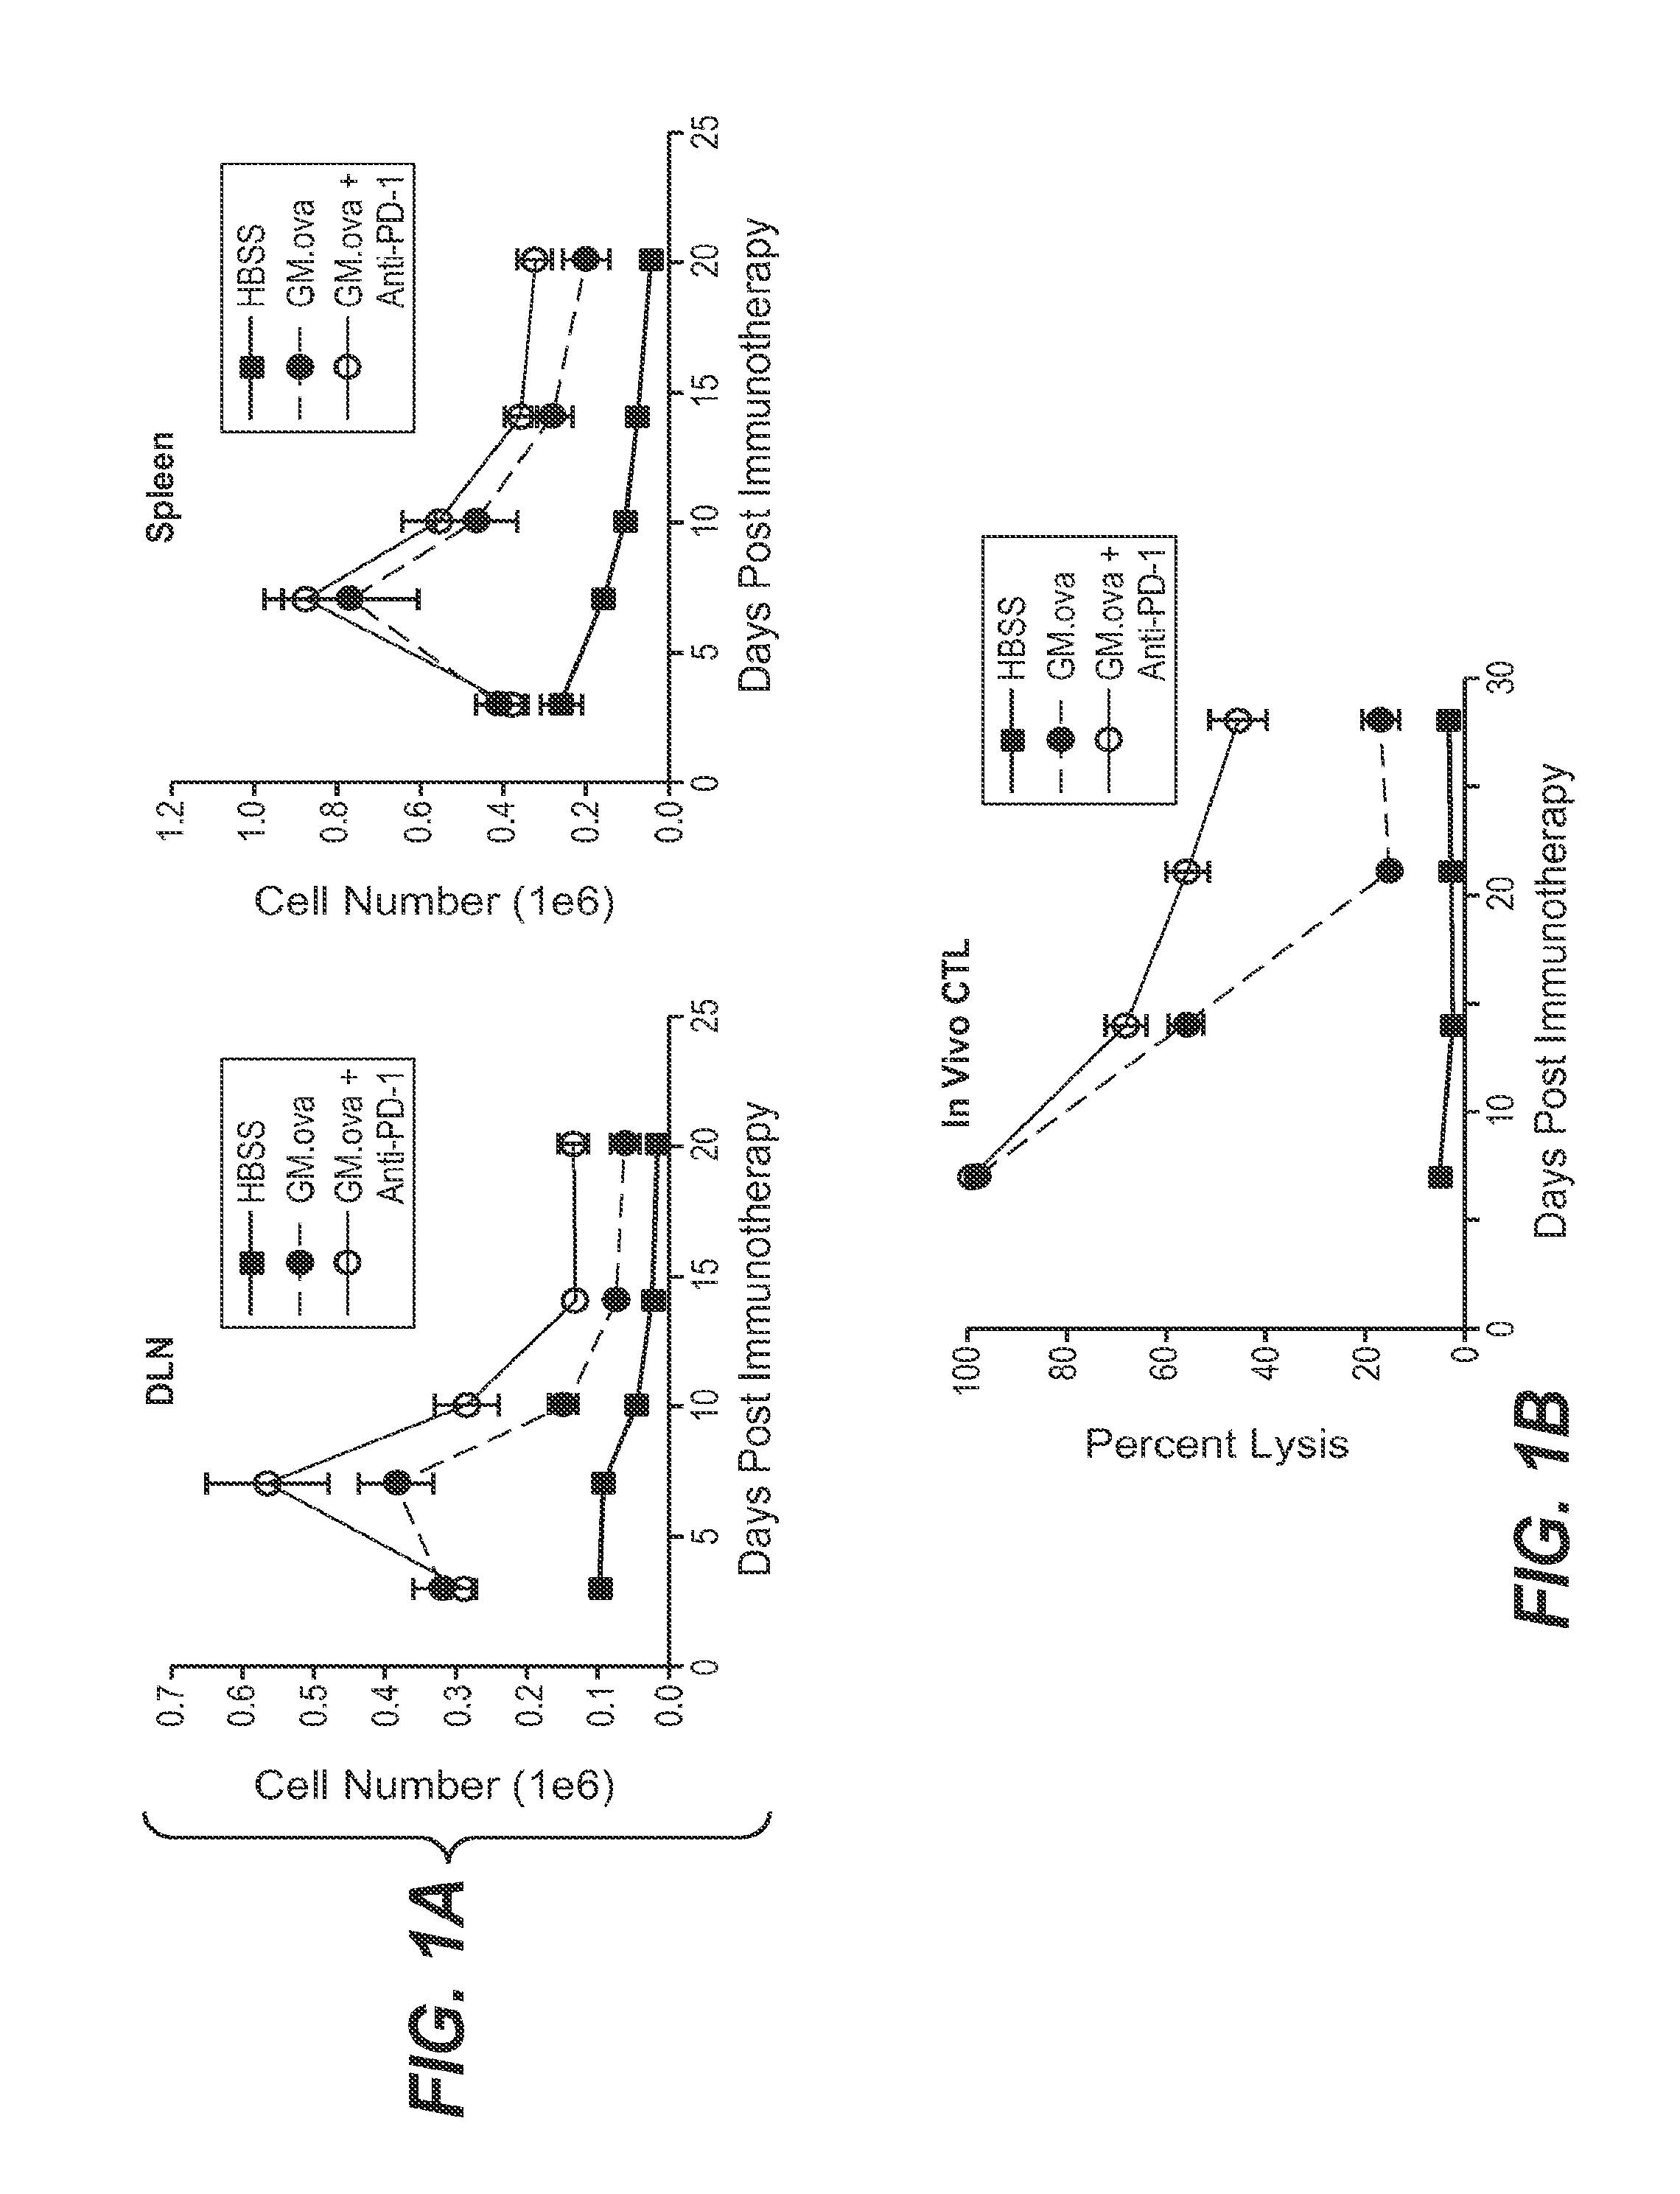 Pd-1 antibodies in combination with a cytokine-secreting cell and methods of use thereof